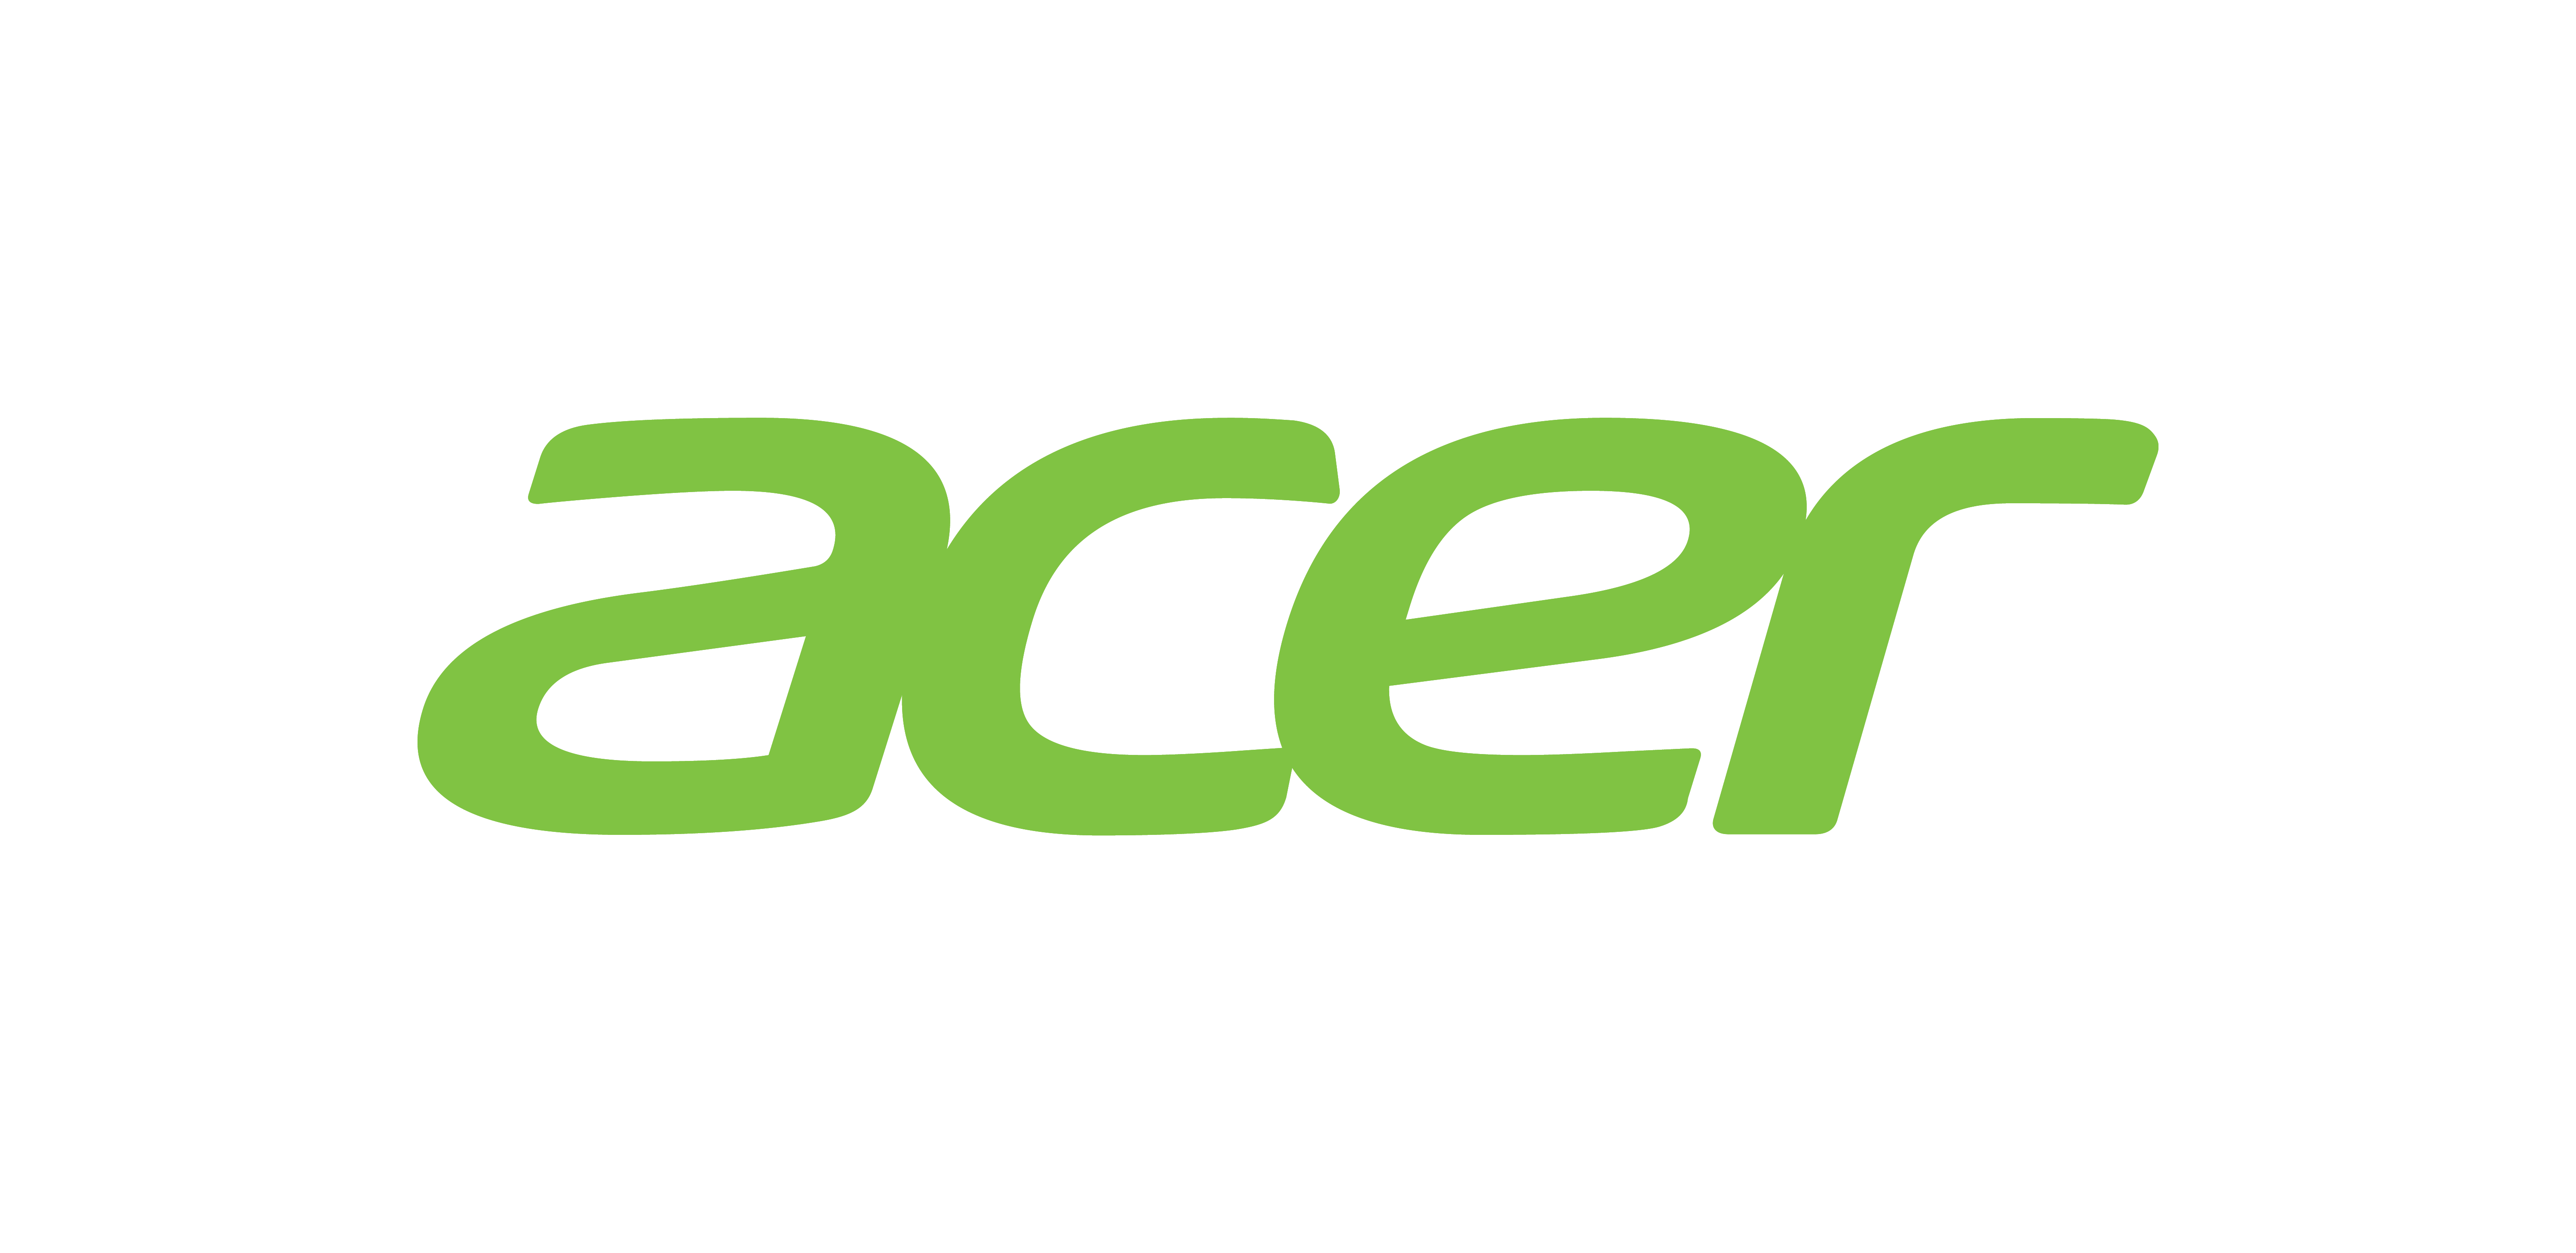 Acer becomes No.1 desktop PC brand in very large enterprise segment and retains its No.1 PC brand ..